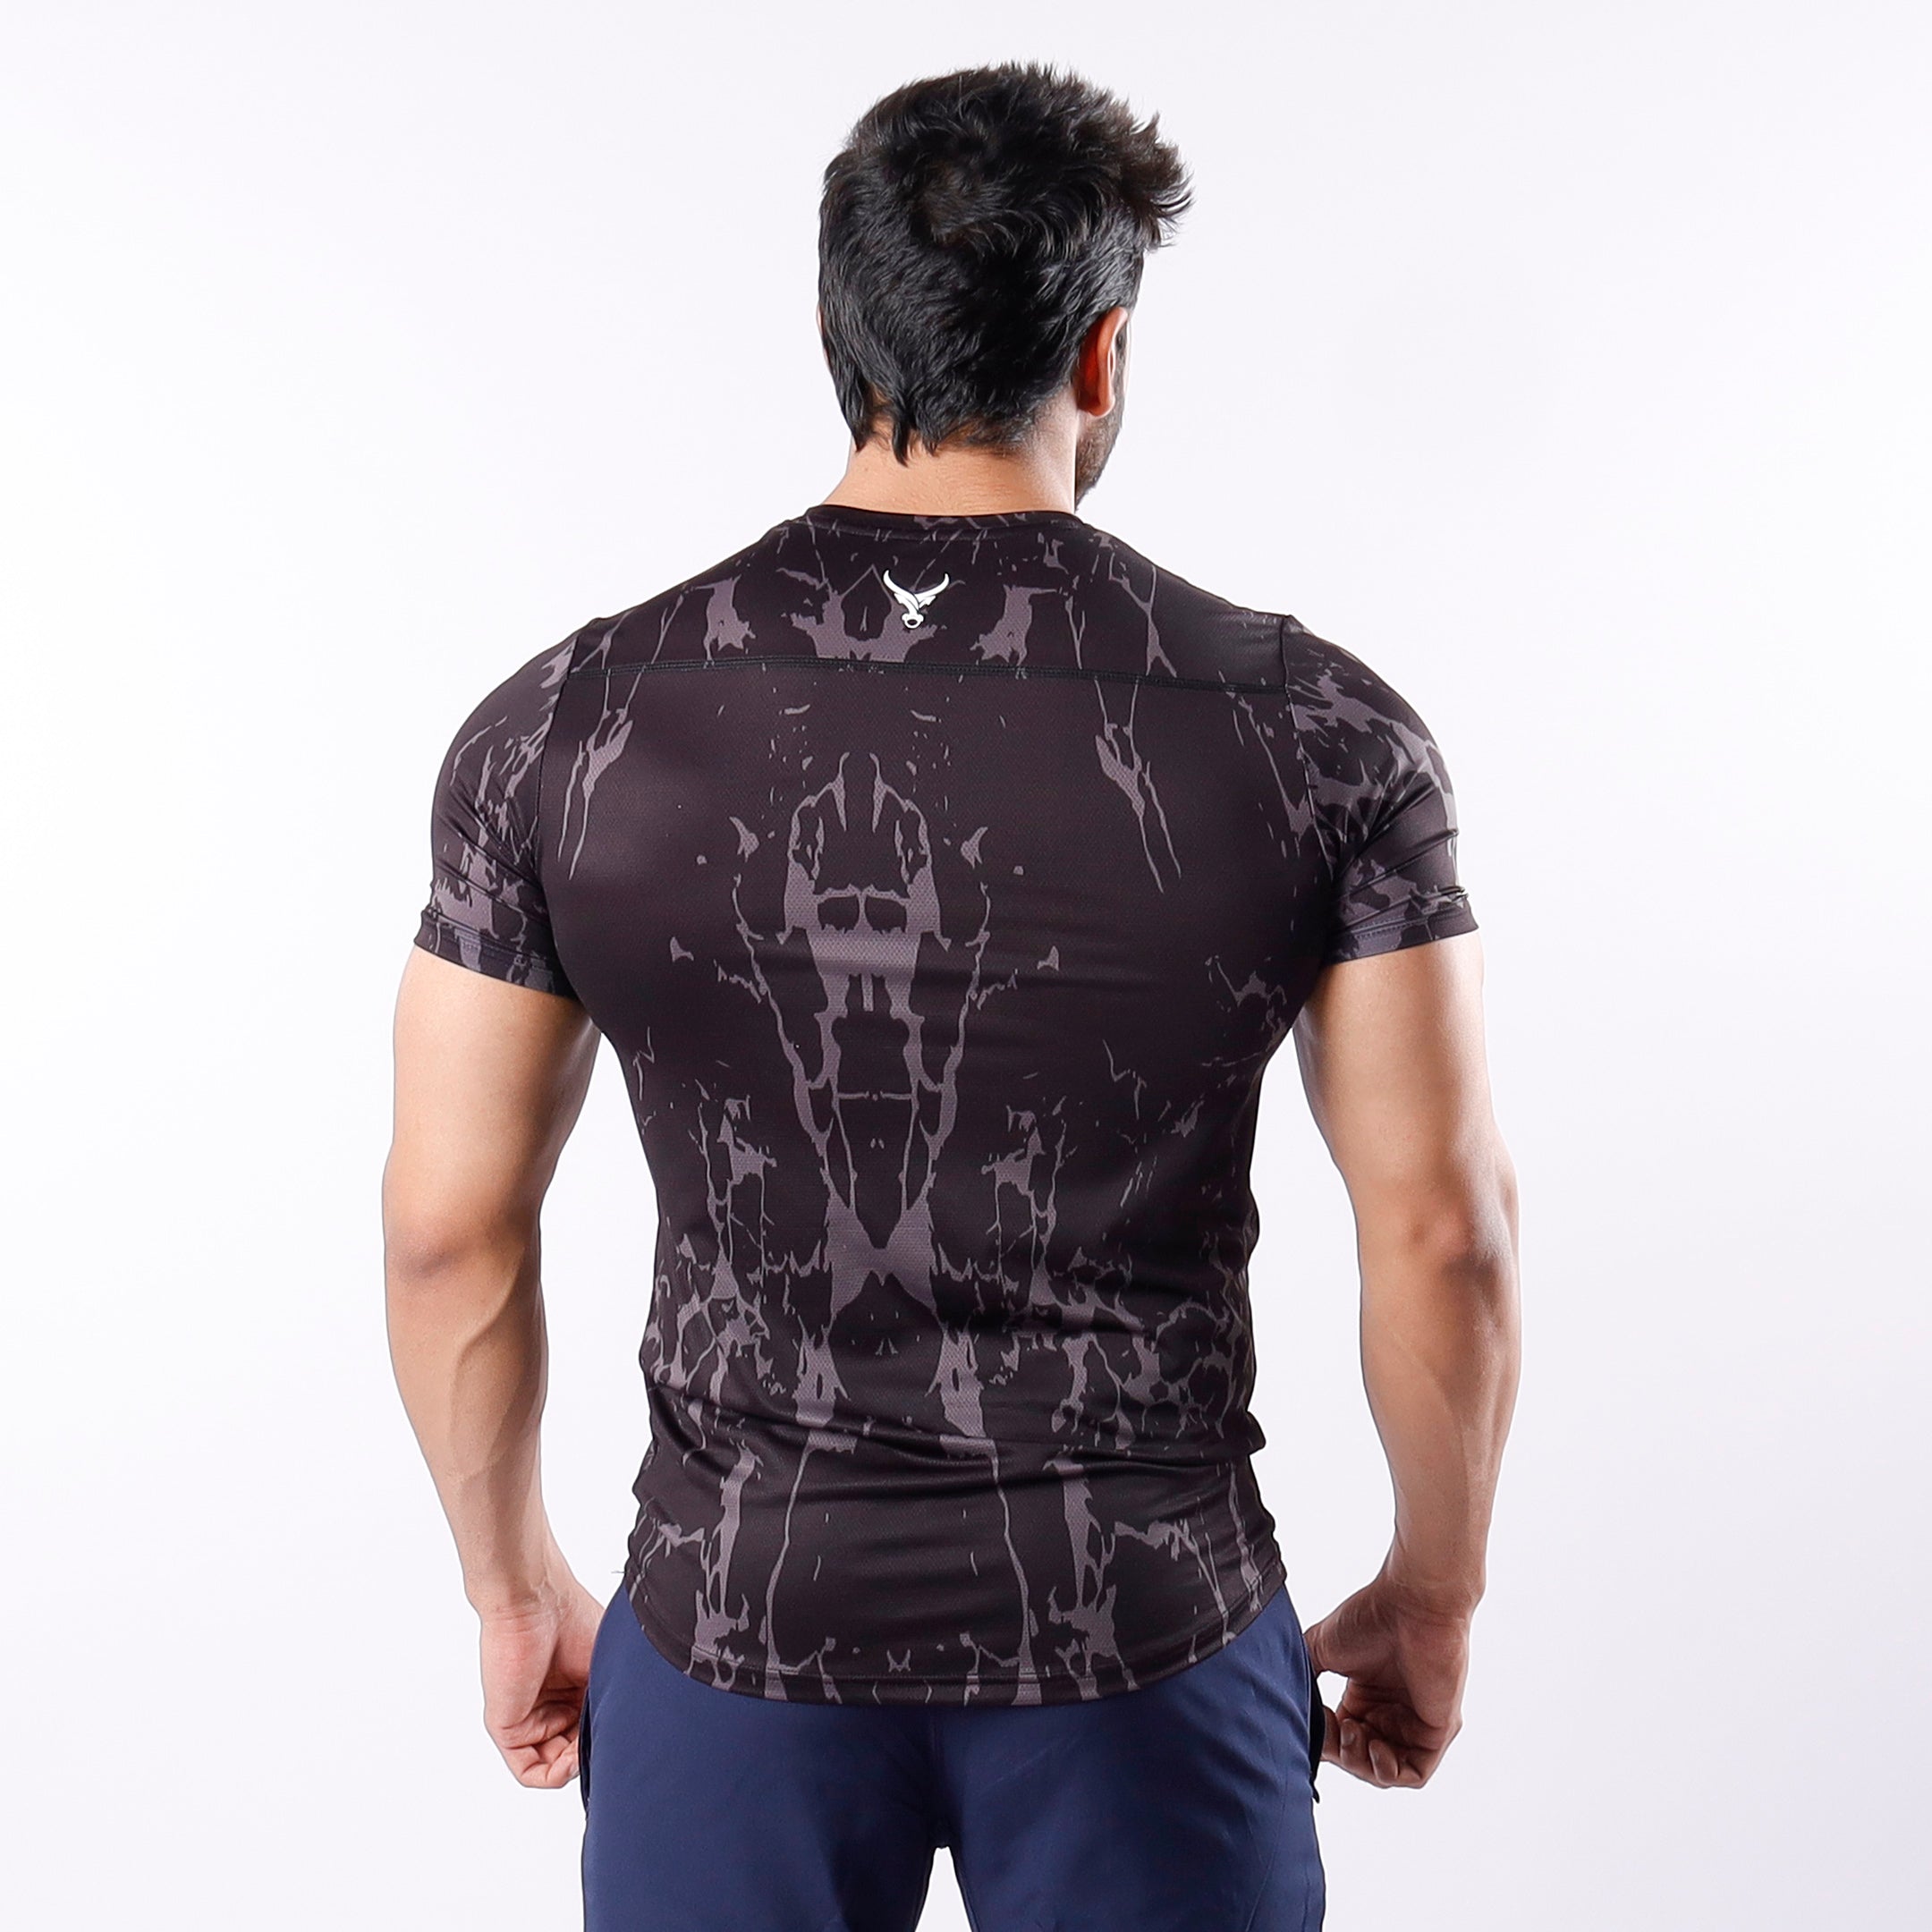 Muscle Shirt Black Marble